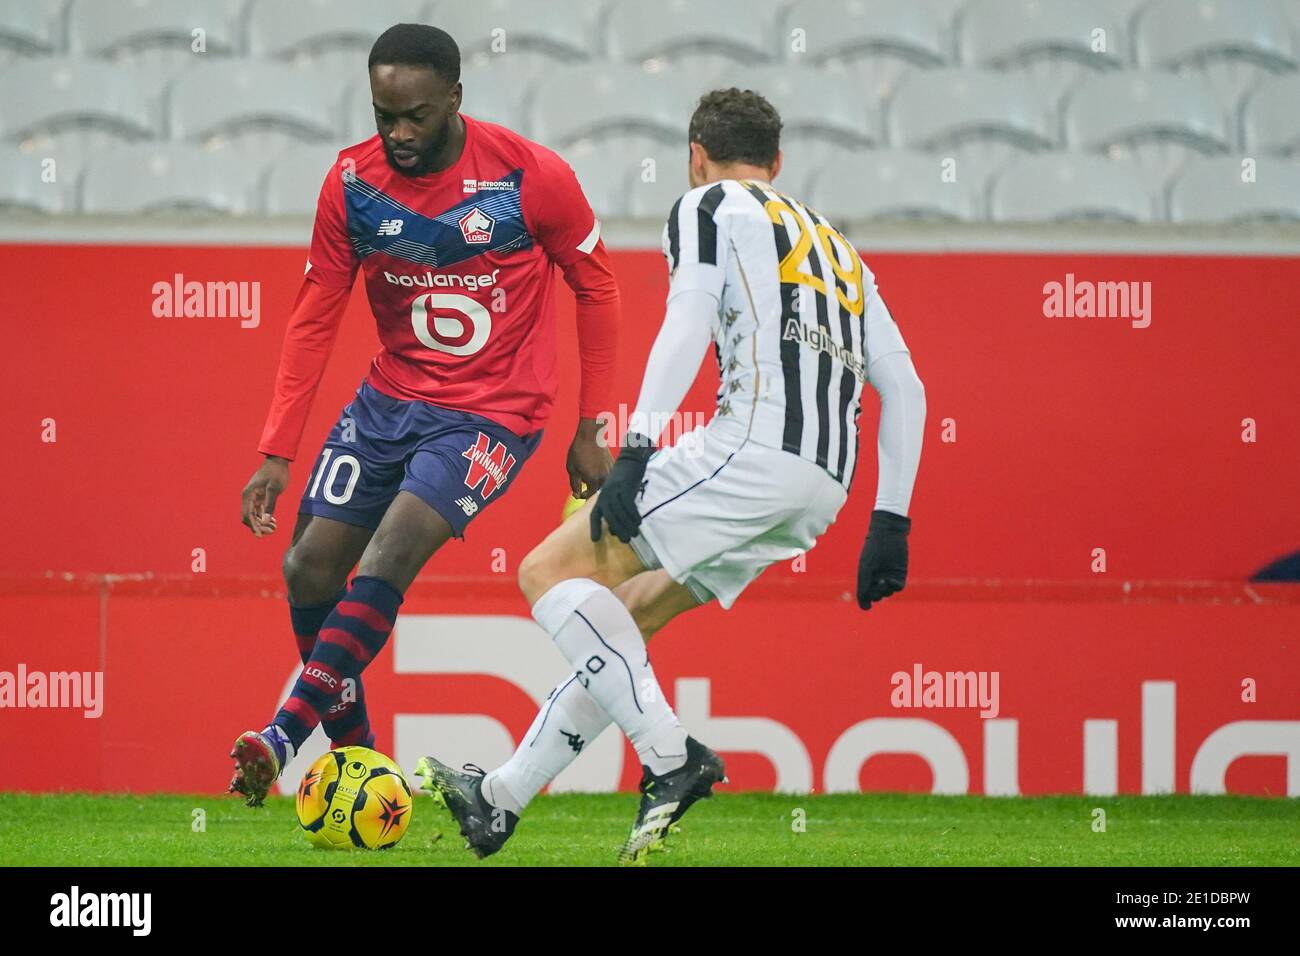 LILLE, FRANCE - JANUARY 6: Jonathan Ikone of Lille OSC, Vincent Manceau of Angers SCO during the Ligue 1 match between Lille OSC and Angers SCO at Stade Pierre Mauroy on January 6, 2021 in Lille, France (Photo by Jeroen Meuwsen/BSR Agency/Alamy Live News)*** Local Caption *** Jonathan Ikone, Vincent Manceau Stock Photo